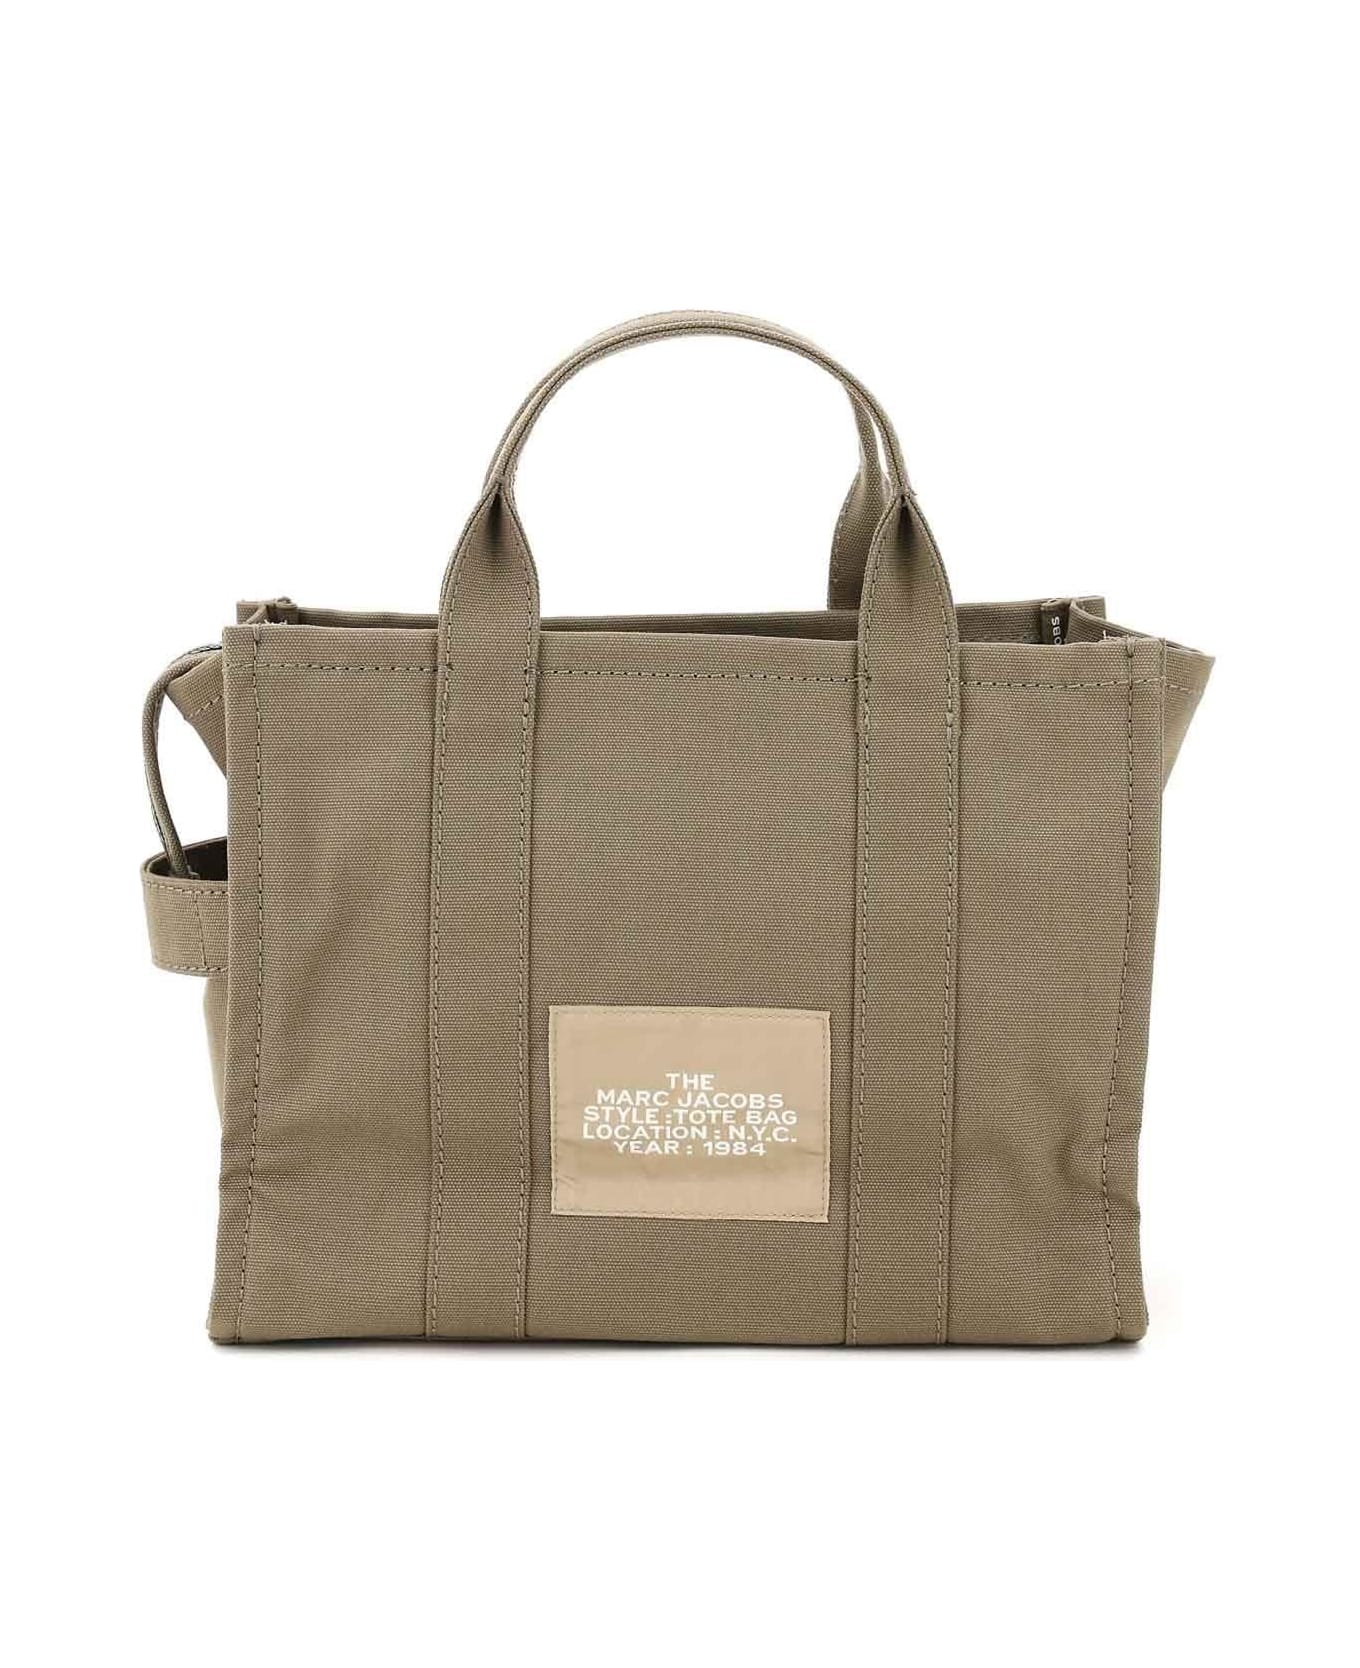 Marc Jacobs The Small Traveler Tote Bag - Slate Green トートバッグ